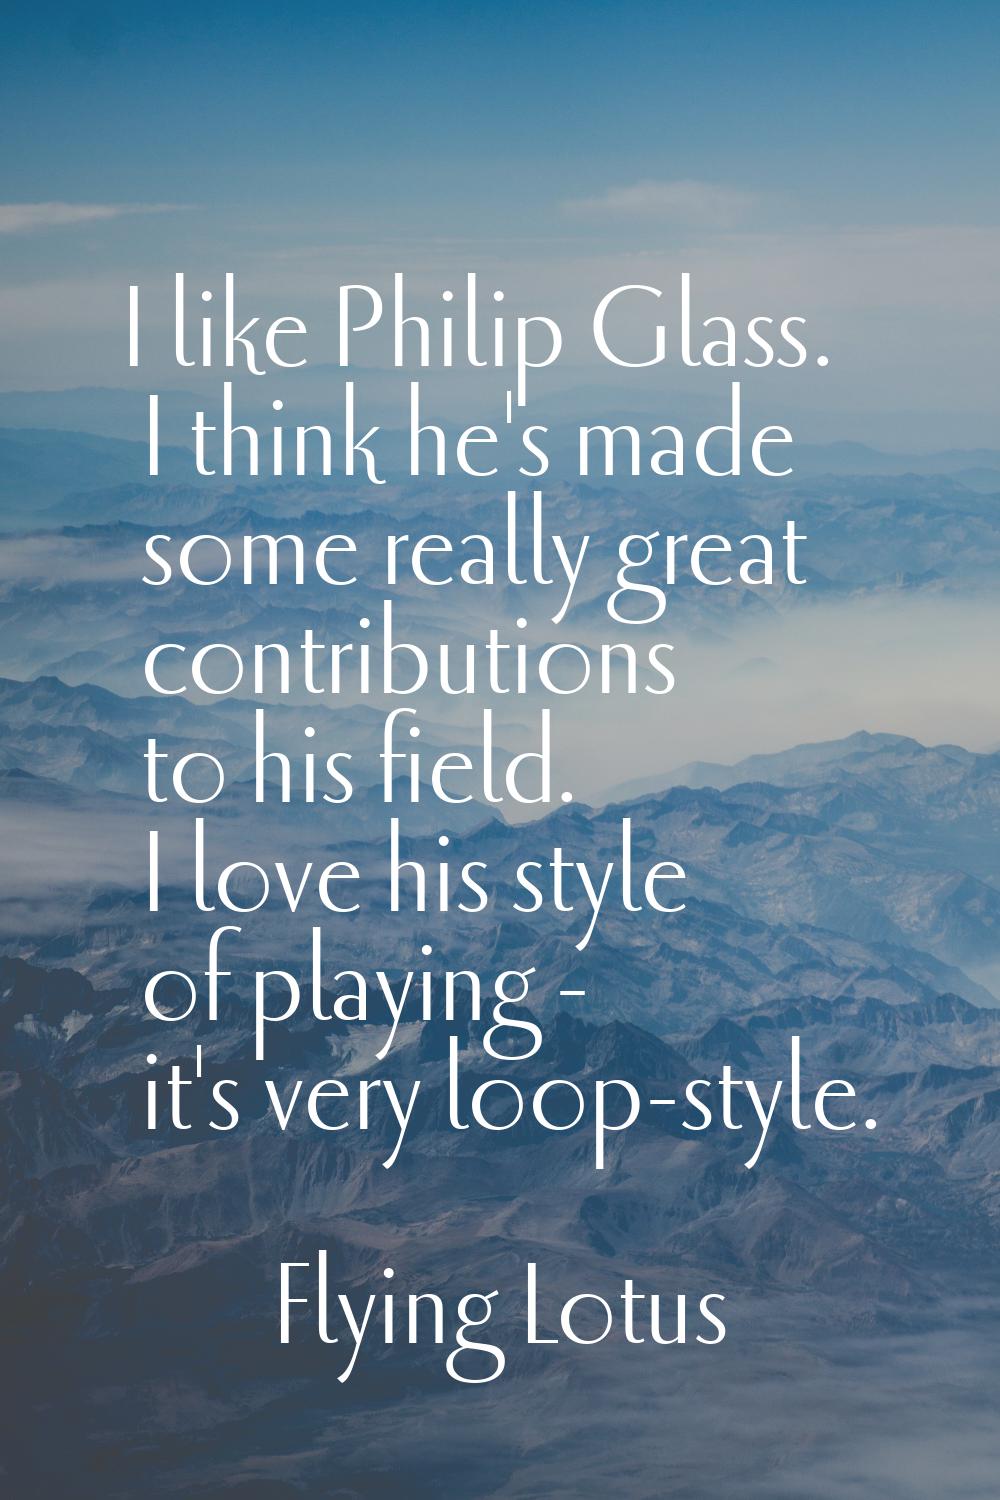 I like Philip Glass. I think he's made some really great contributions to his field. I love his sty